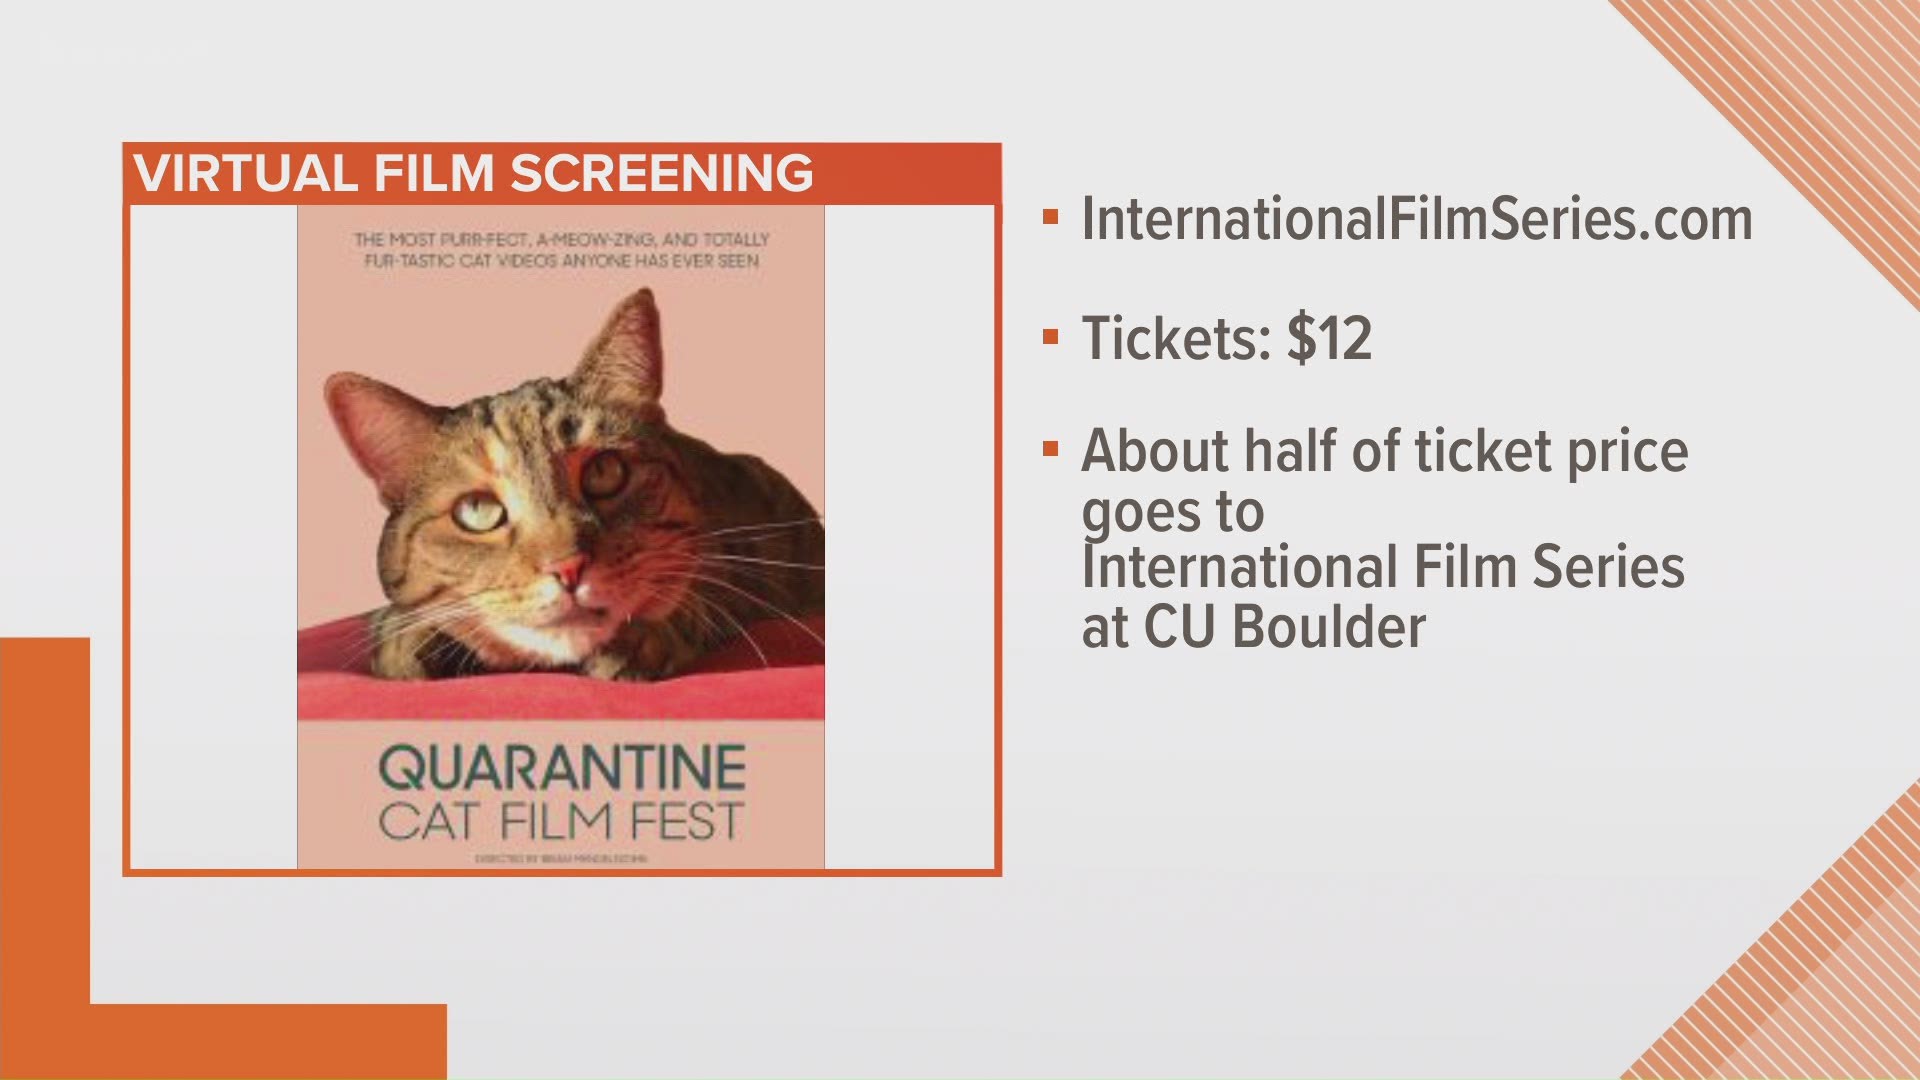 You can watch the Quarantine Cat Film Fest today, and about half of ticket proceeds will go towards the International Film Series at CU Boulder.